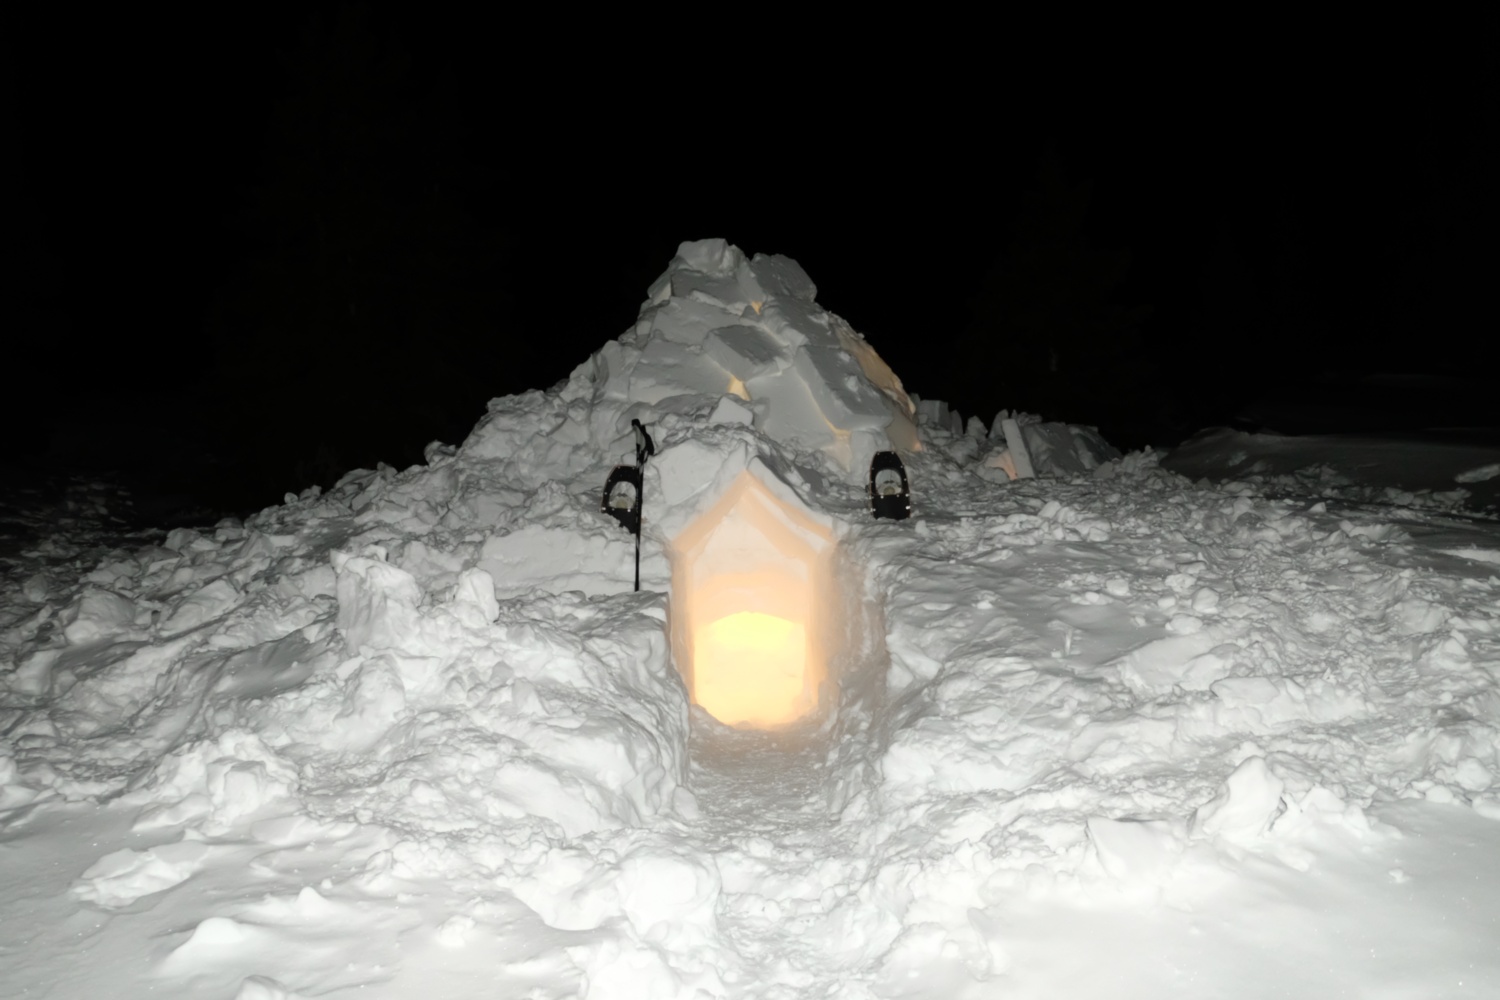 Looking at the igloo, with the lantern lighting the interior.